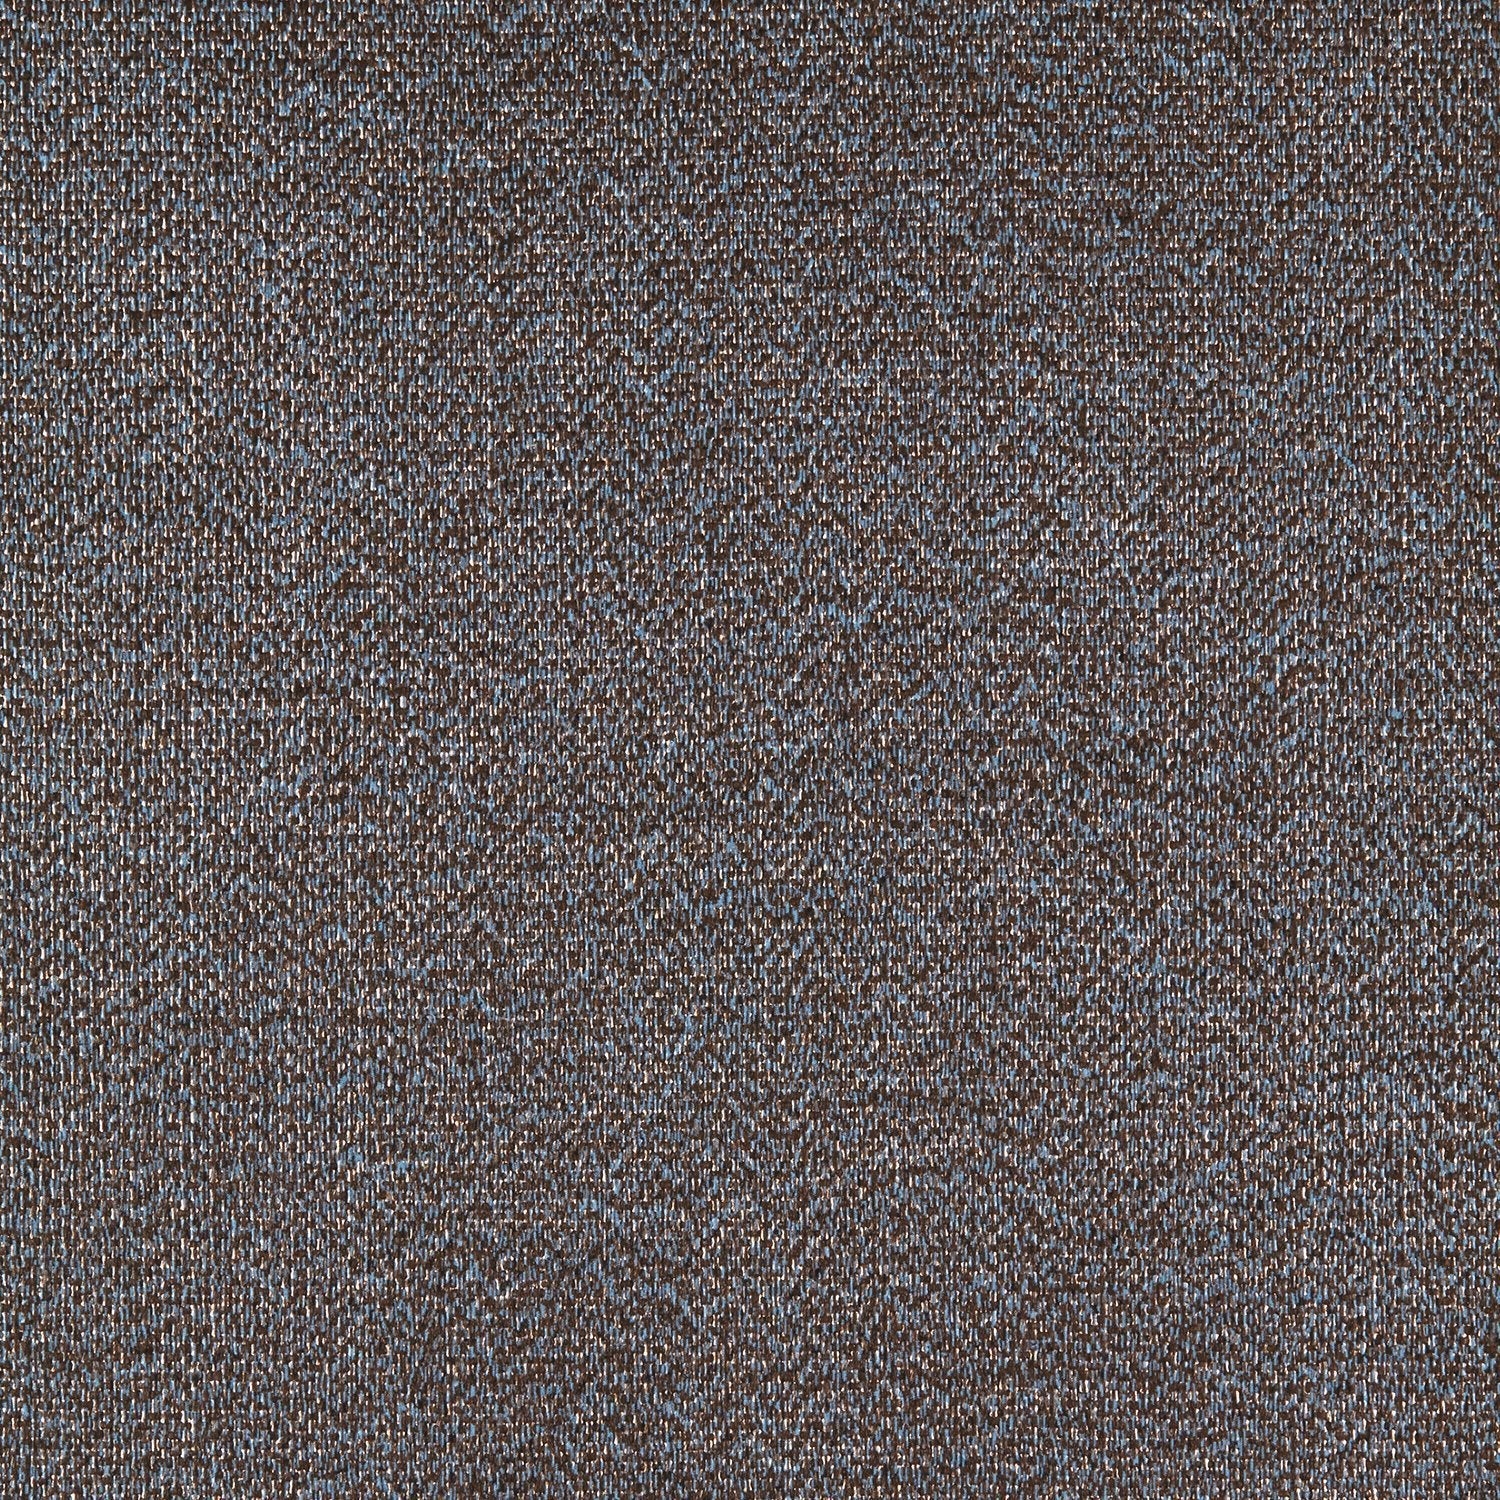 Tweed - Y46932 - Wallcovering - Vycon - Kube Contract